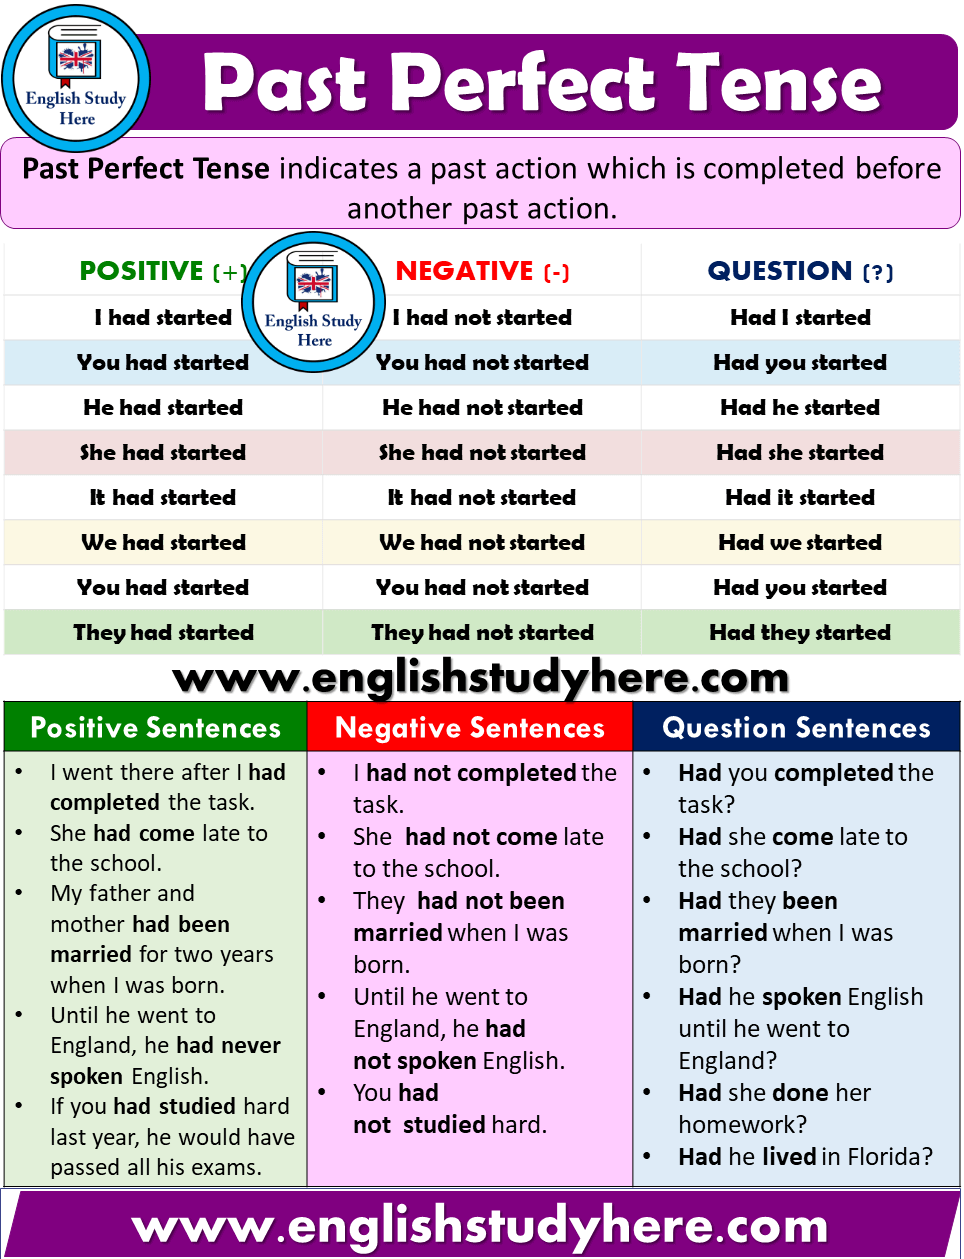 past-perfect-tense-detailed-expression-english-study-here